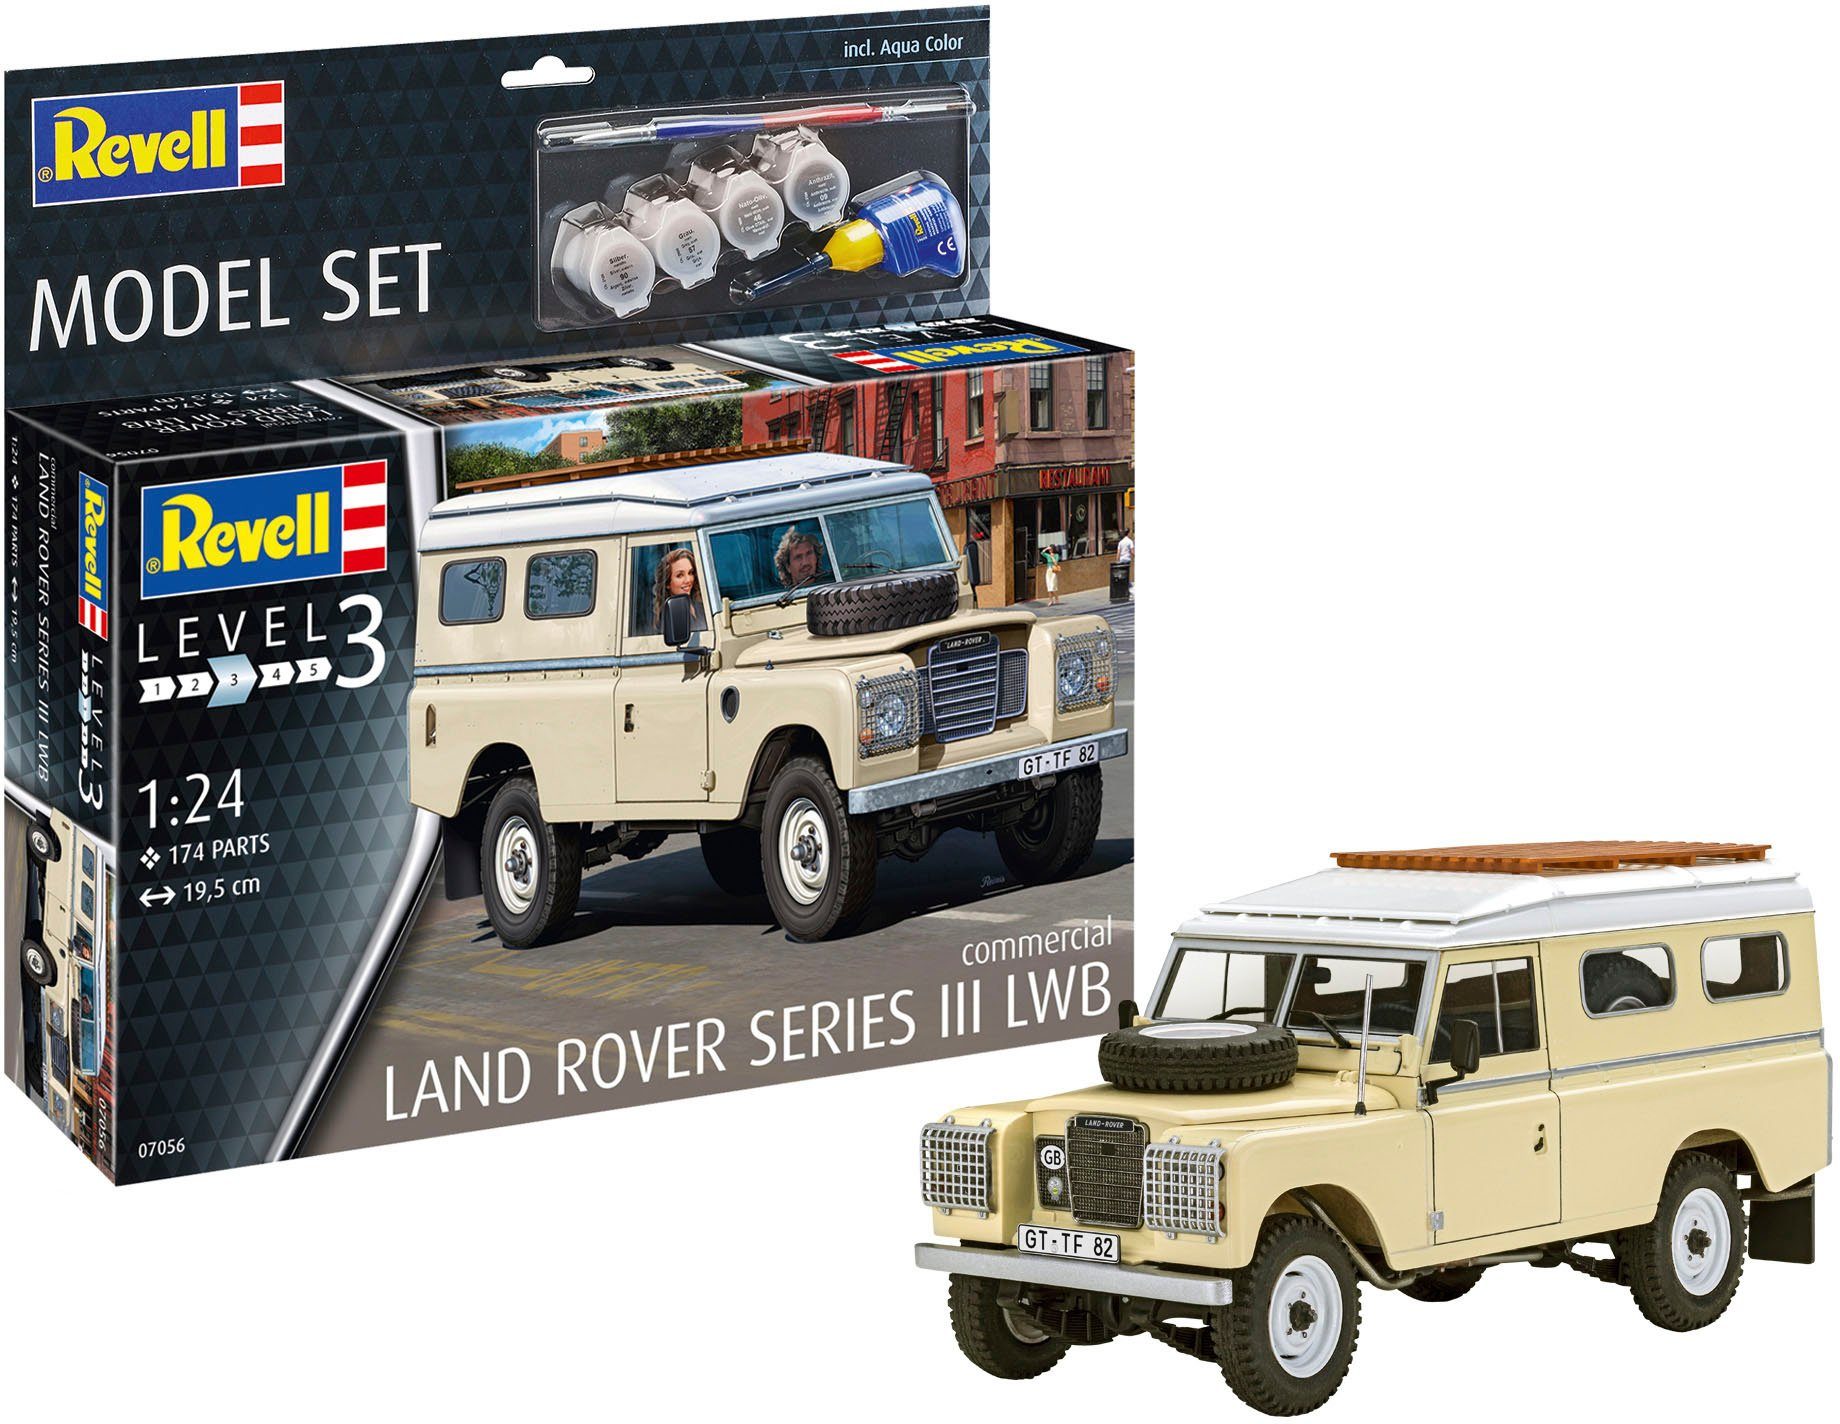 Revell® Modellbausatz Land Rover Series III LWB (commercial), Maßstab 1:24, Made in Europe